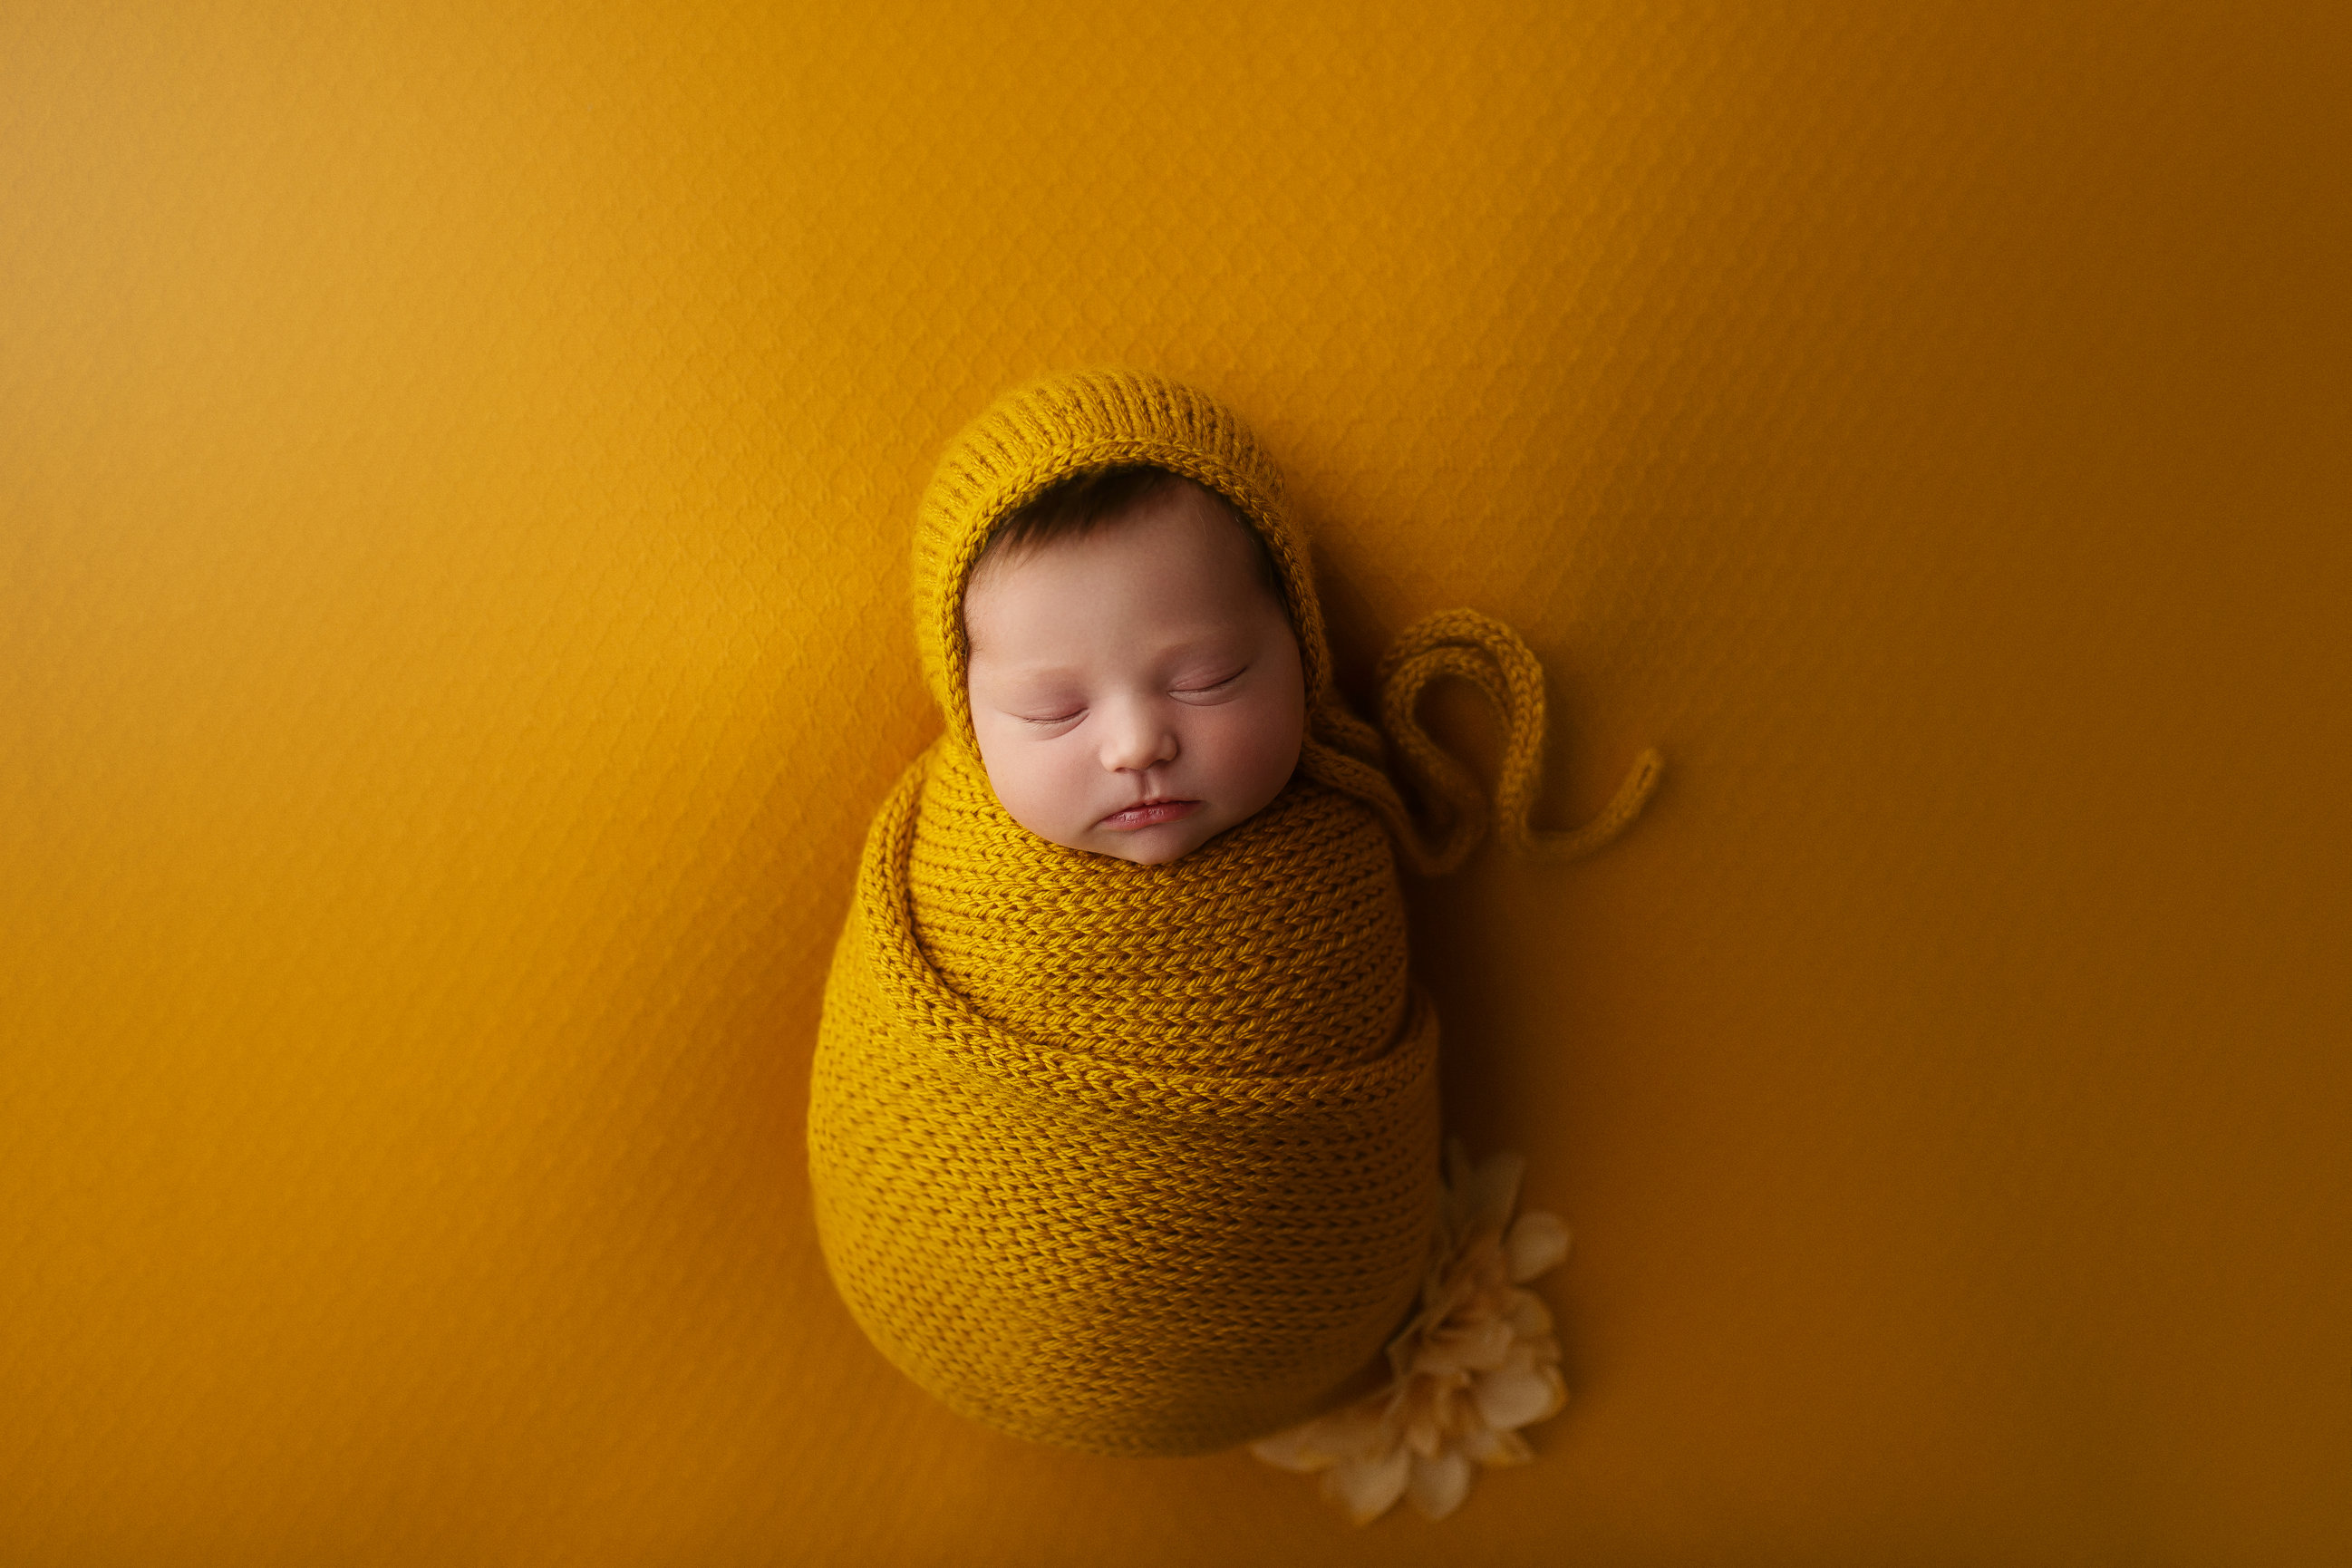 Calgary & Airdrie Family, Maternity and Newborn Photography